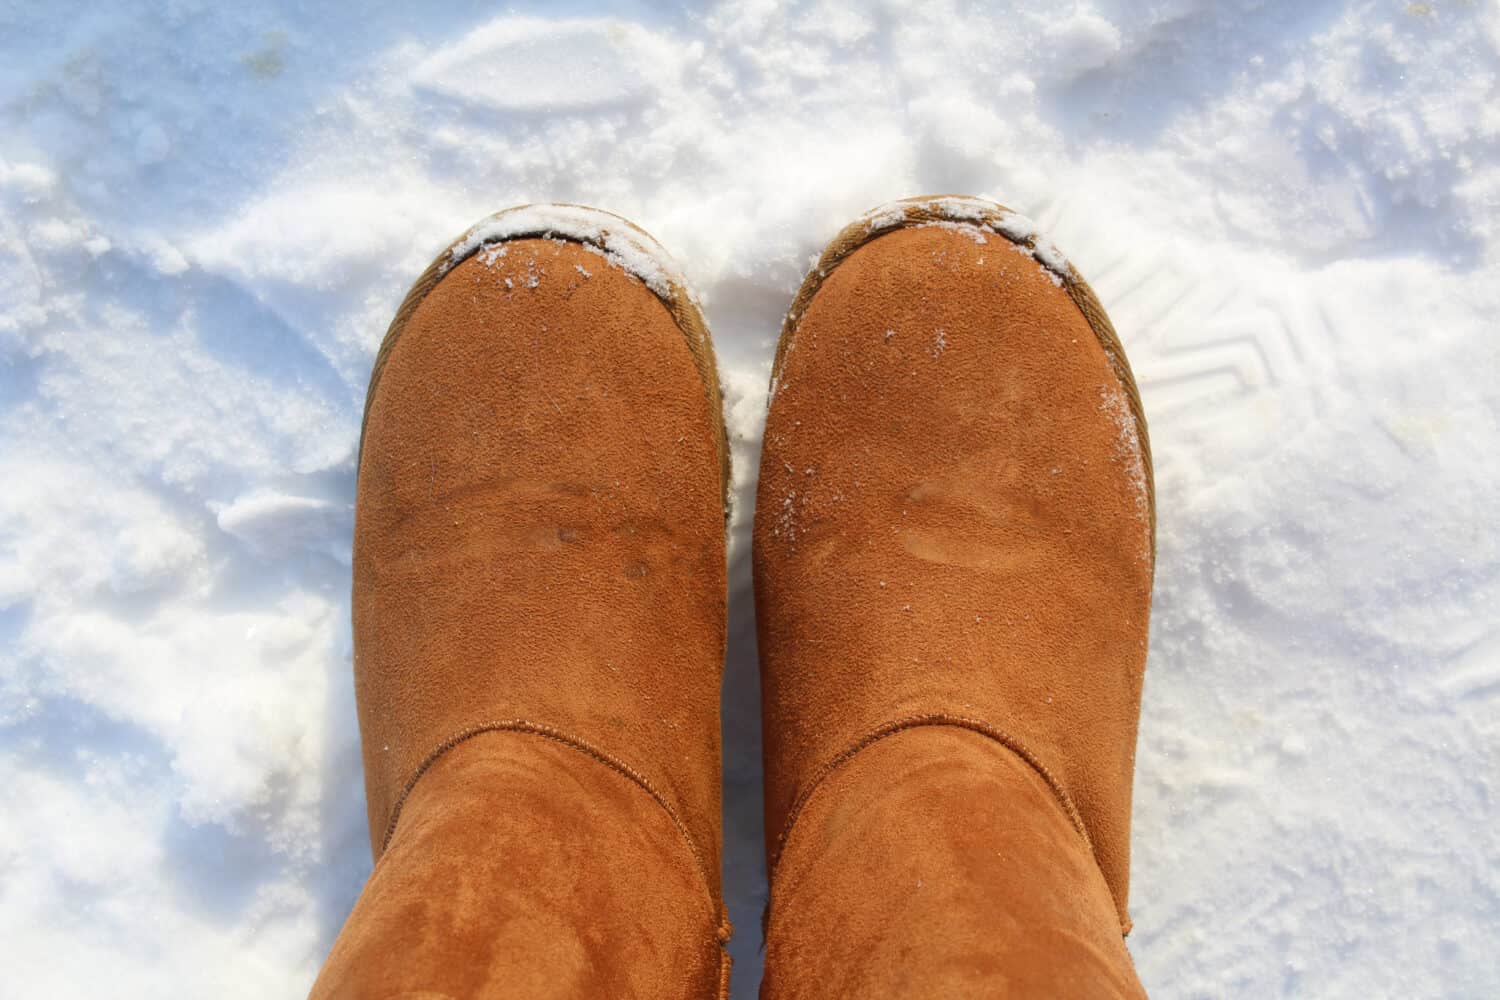 warm brown ugg boots on snow in cold winter